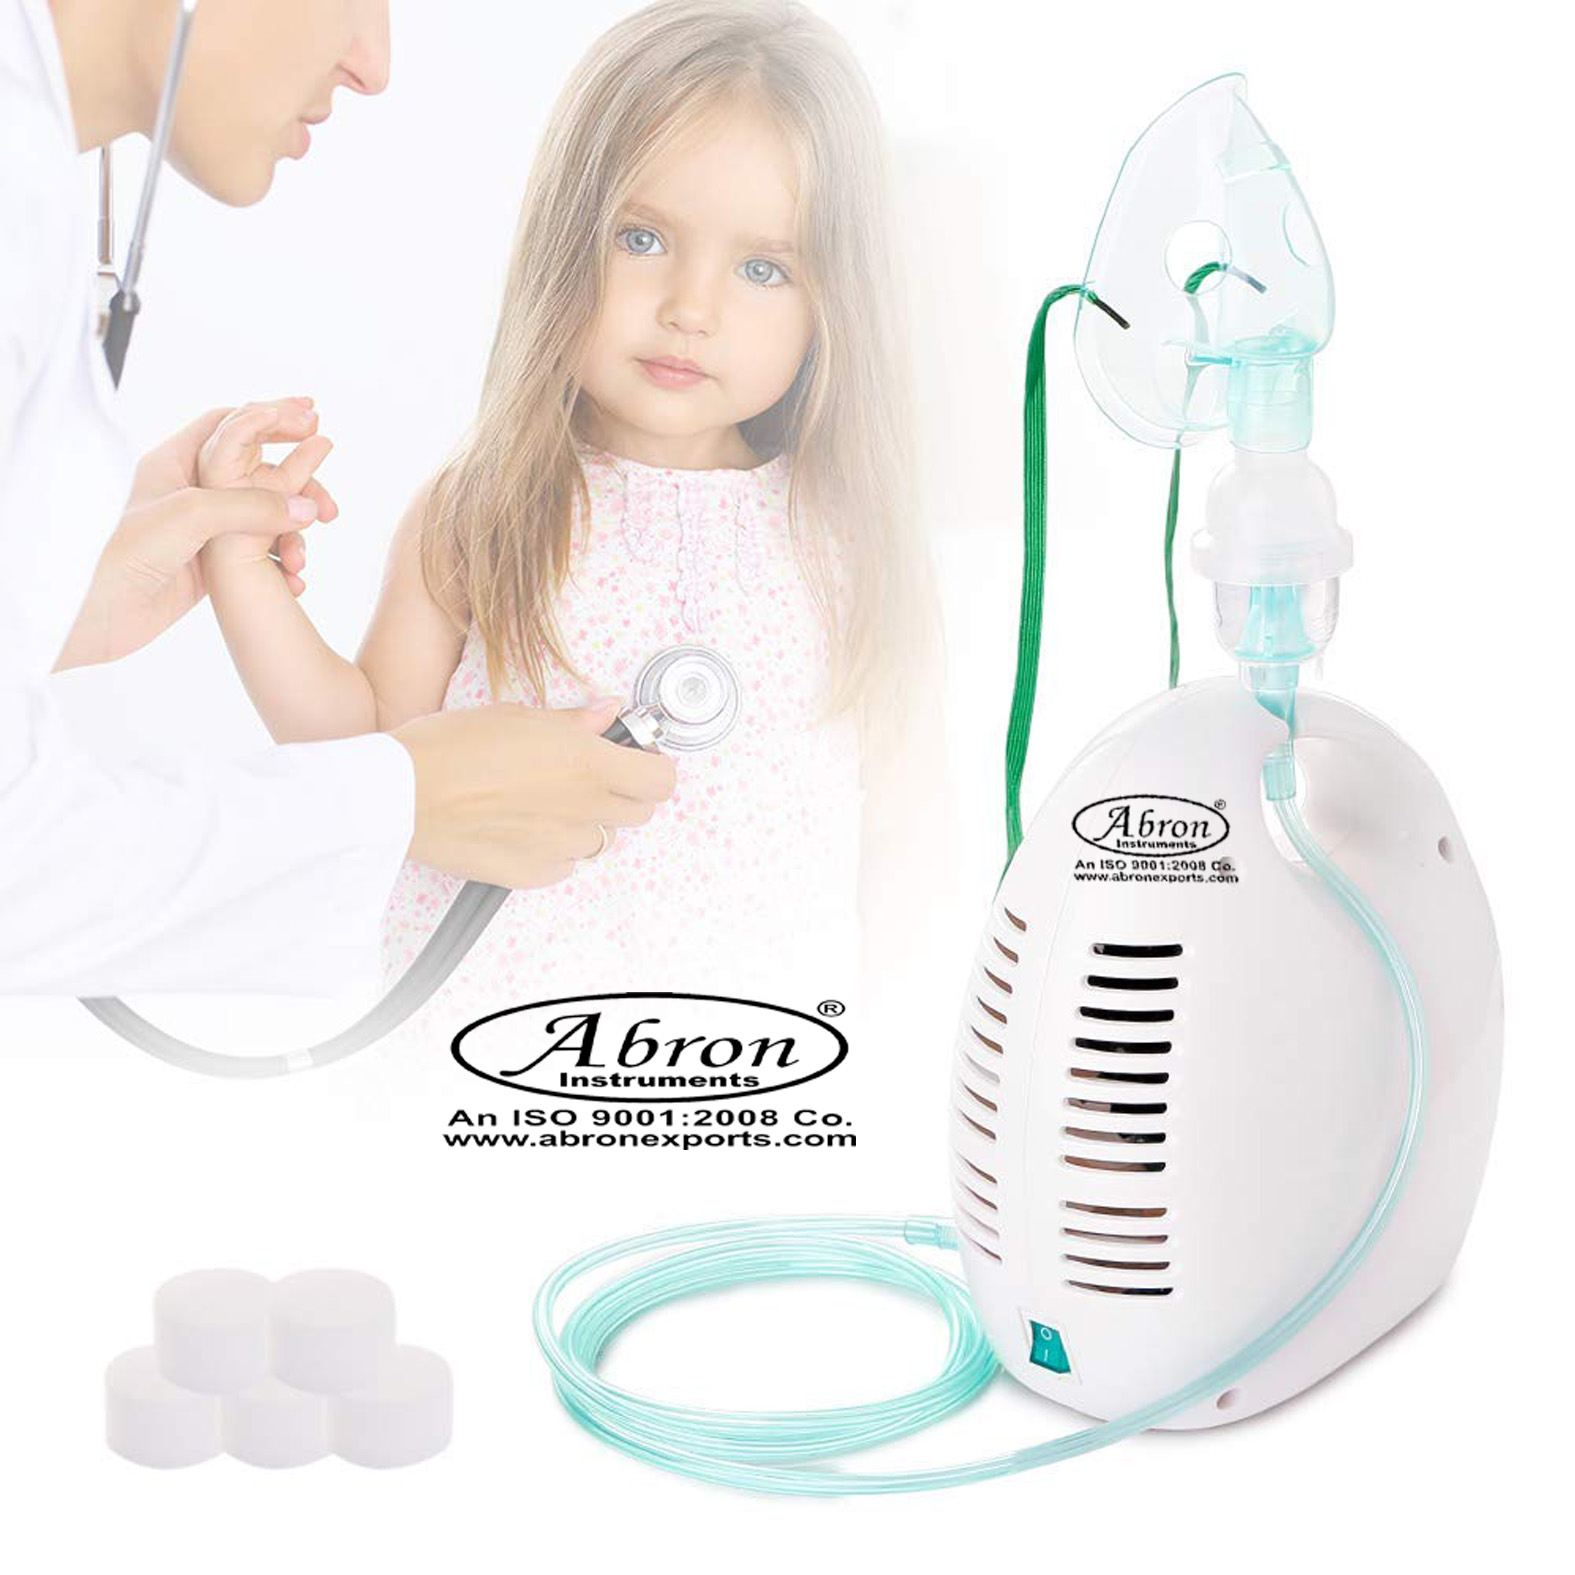 Portable Compressor Nebulizer Inhaler Vaporizer Machine, Childs and Adults Allergy Relief Respiratory Aerosol Medication Therapy ABM-2564B